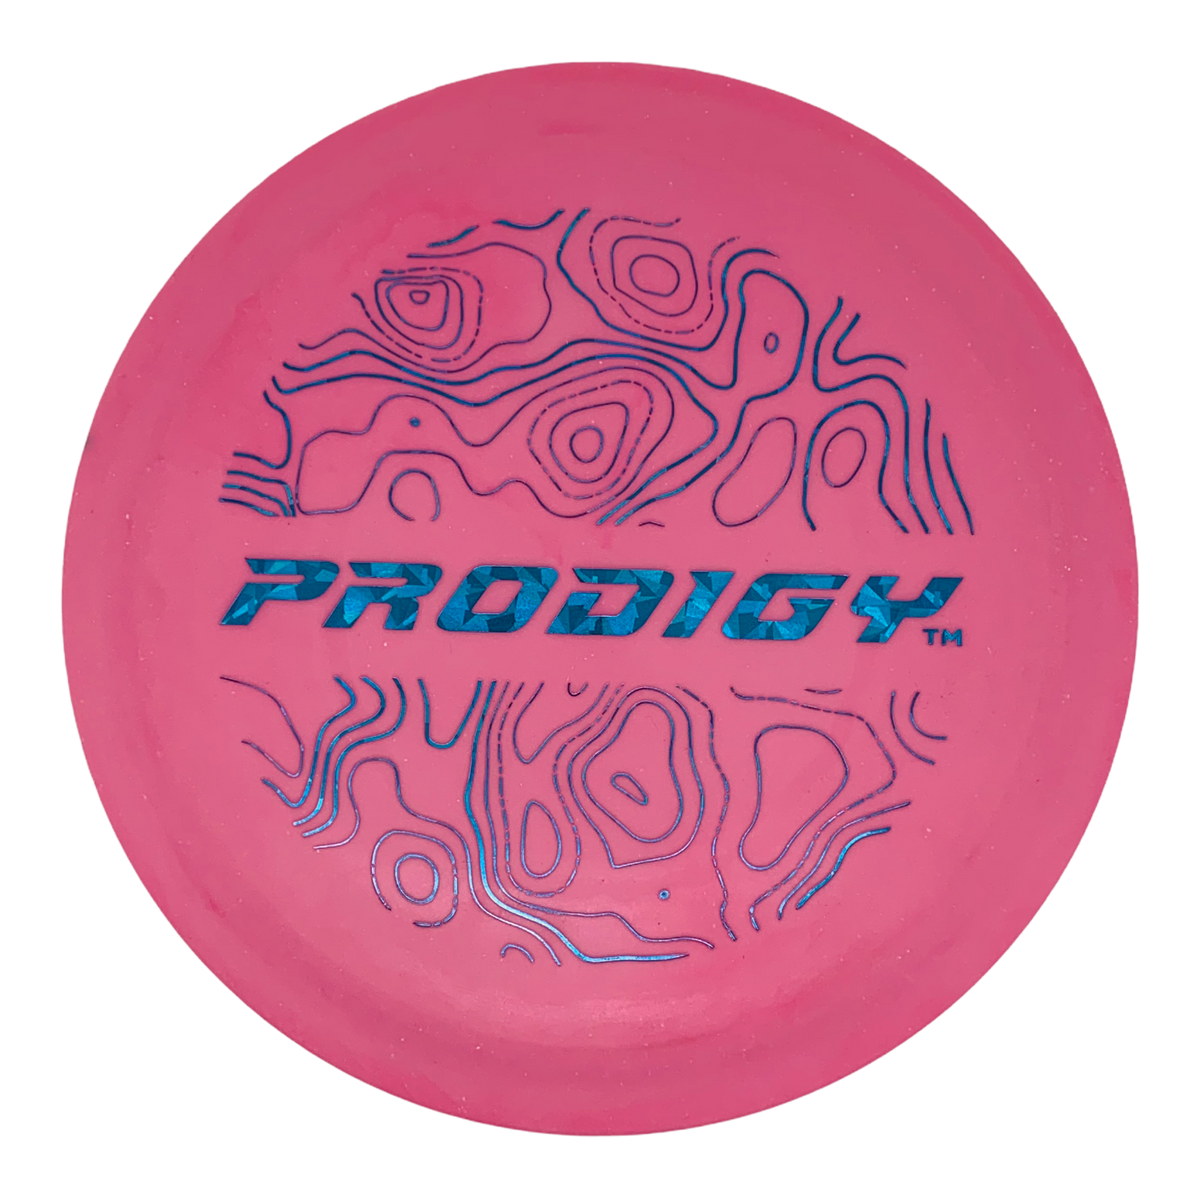 Prodigy 300 Series H4 V2 - LE Topographic Stamp